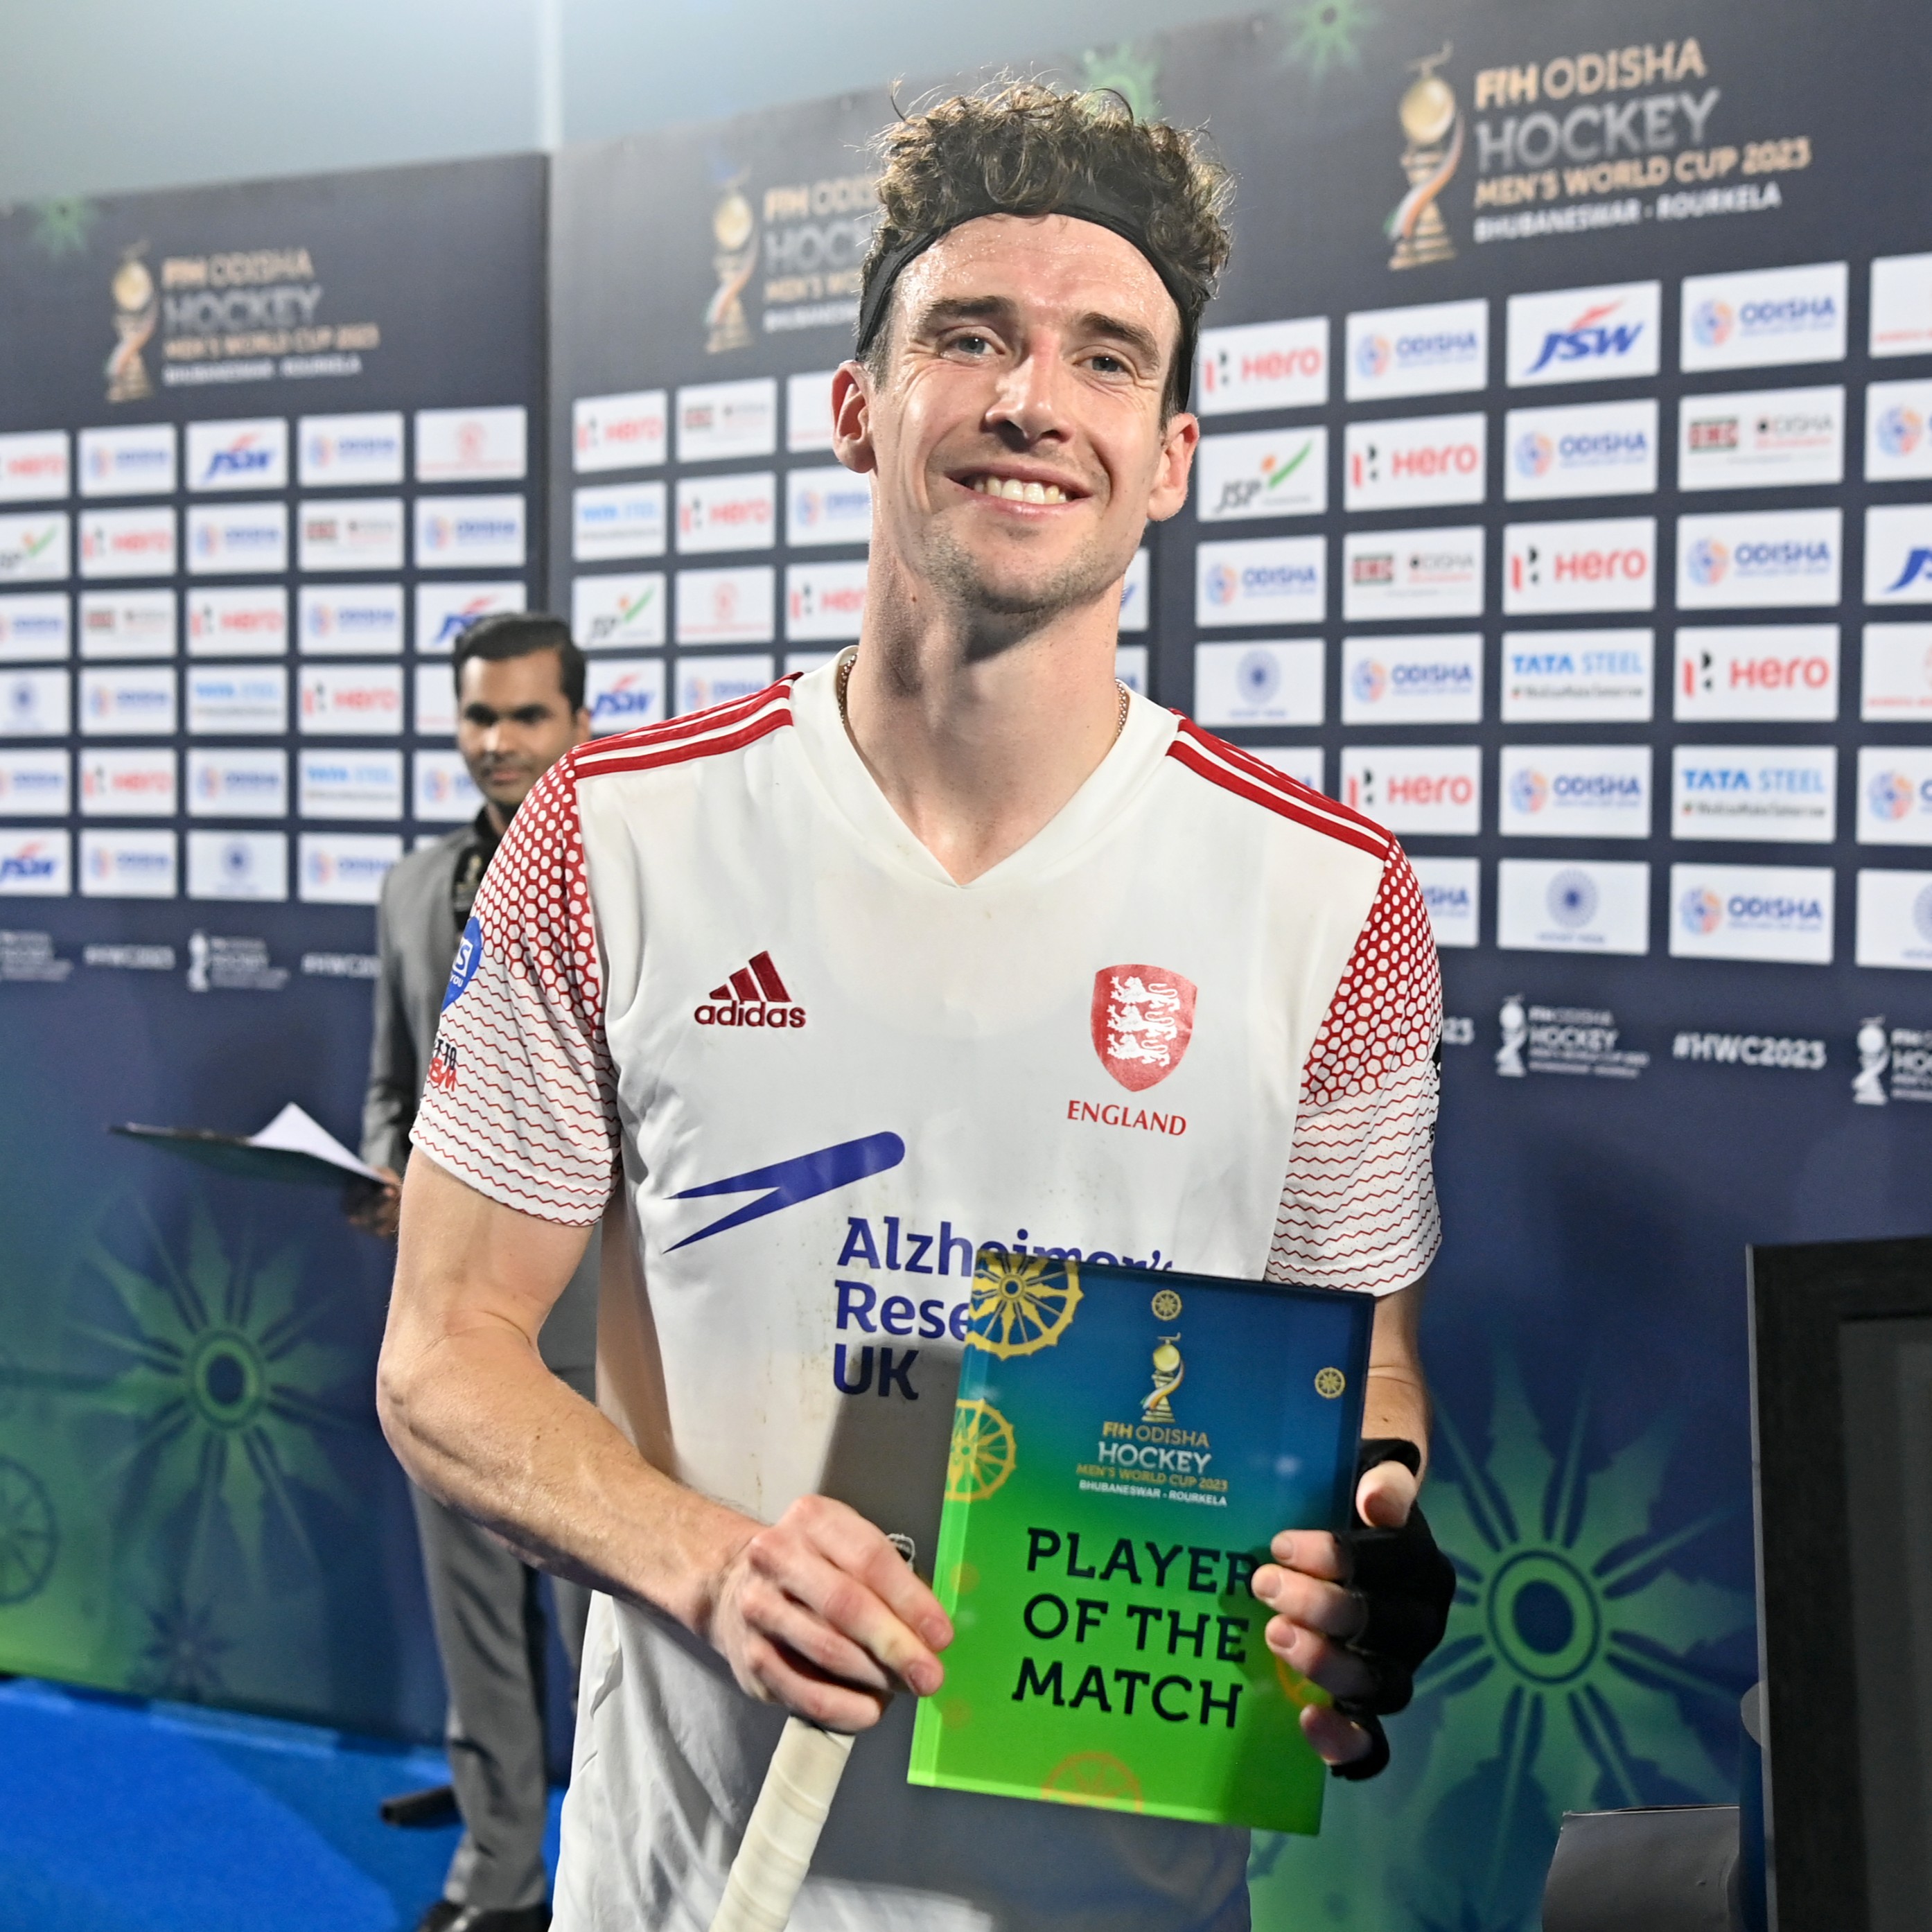 psychologie Piraat Echt England Hockey on Twitter: "Scores the opening goal and gets player of the  match 💪 @proper15 #HWC2023 https://t.co/VzDtBkvXxJ" / Twitter